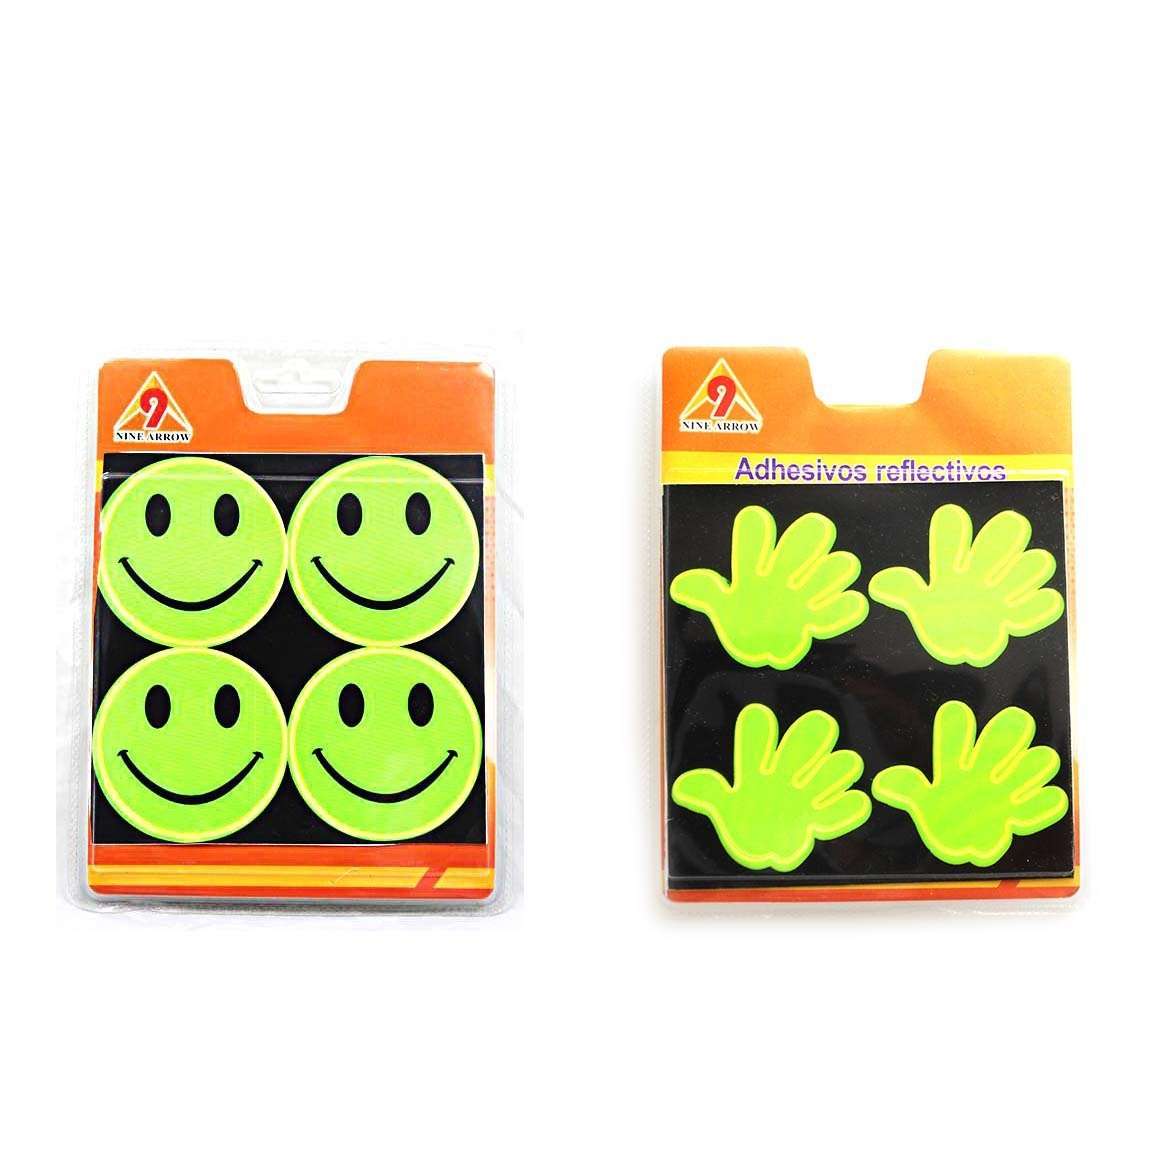 Smiley Face And Handprint Adhesive Reflectors 1838/1837 (Large Letter Rate)